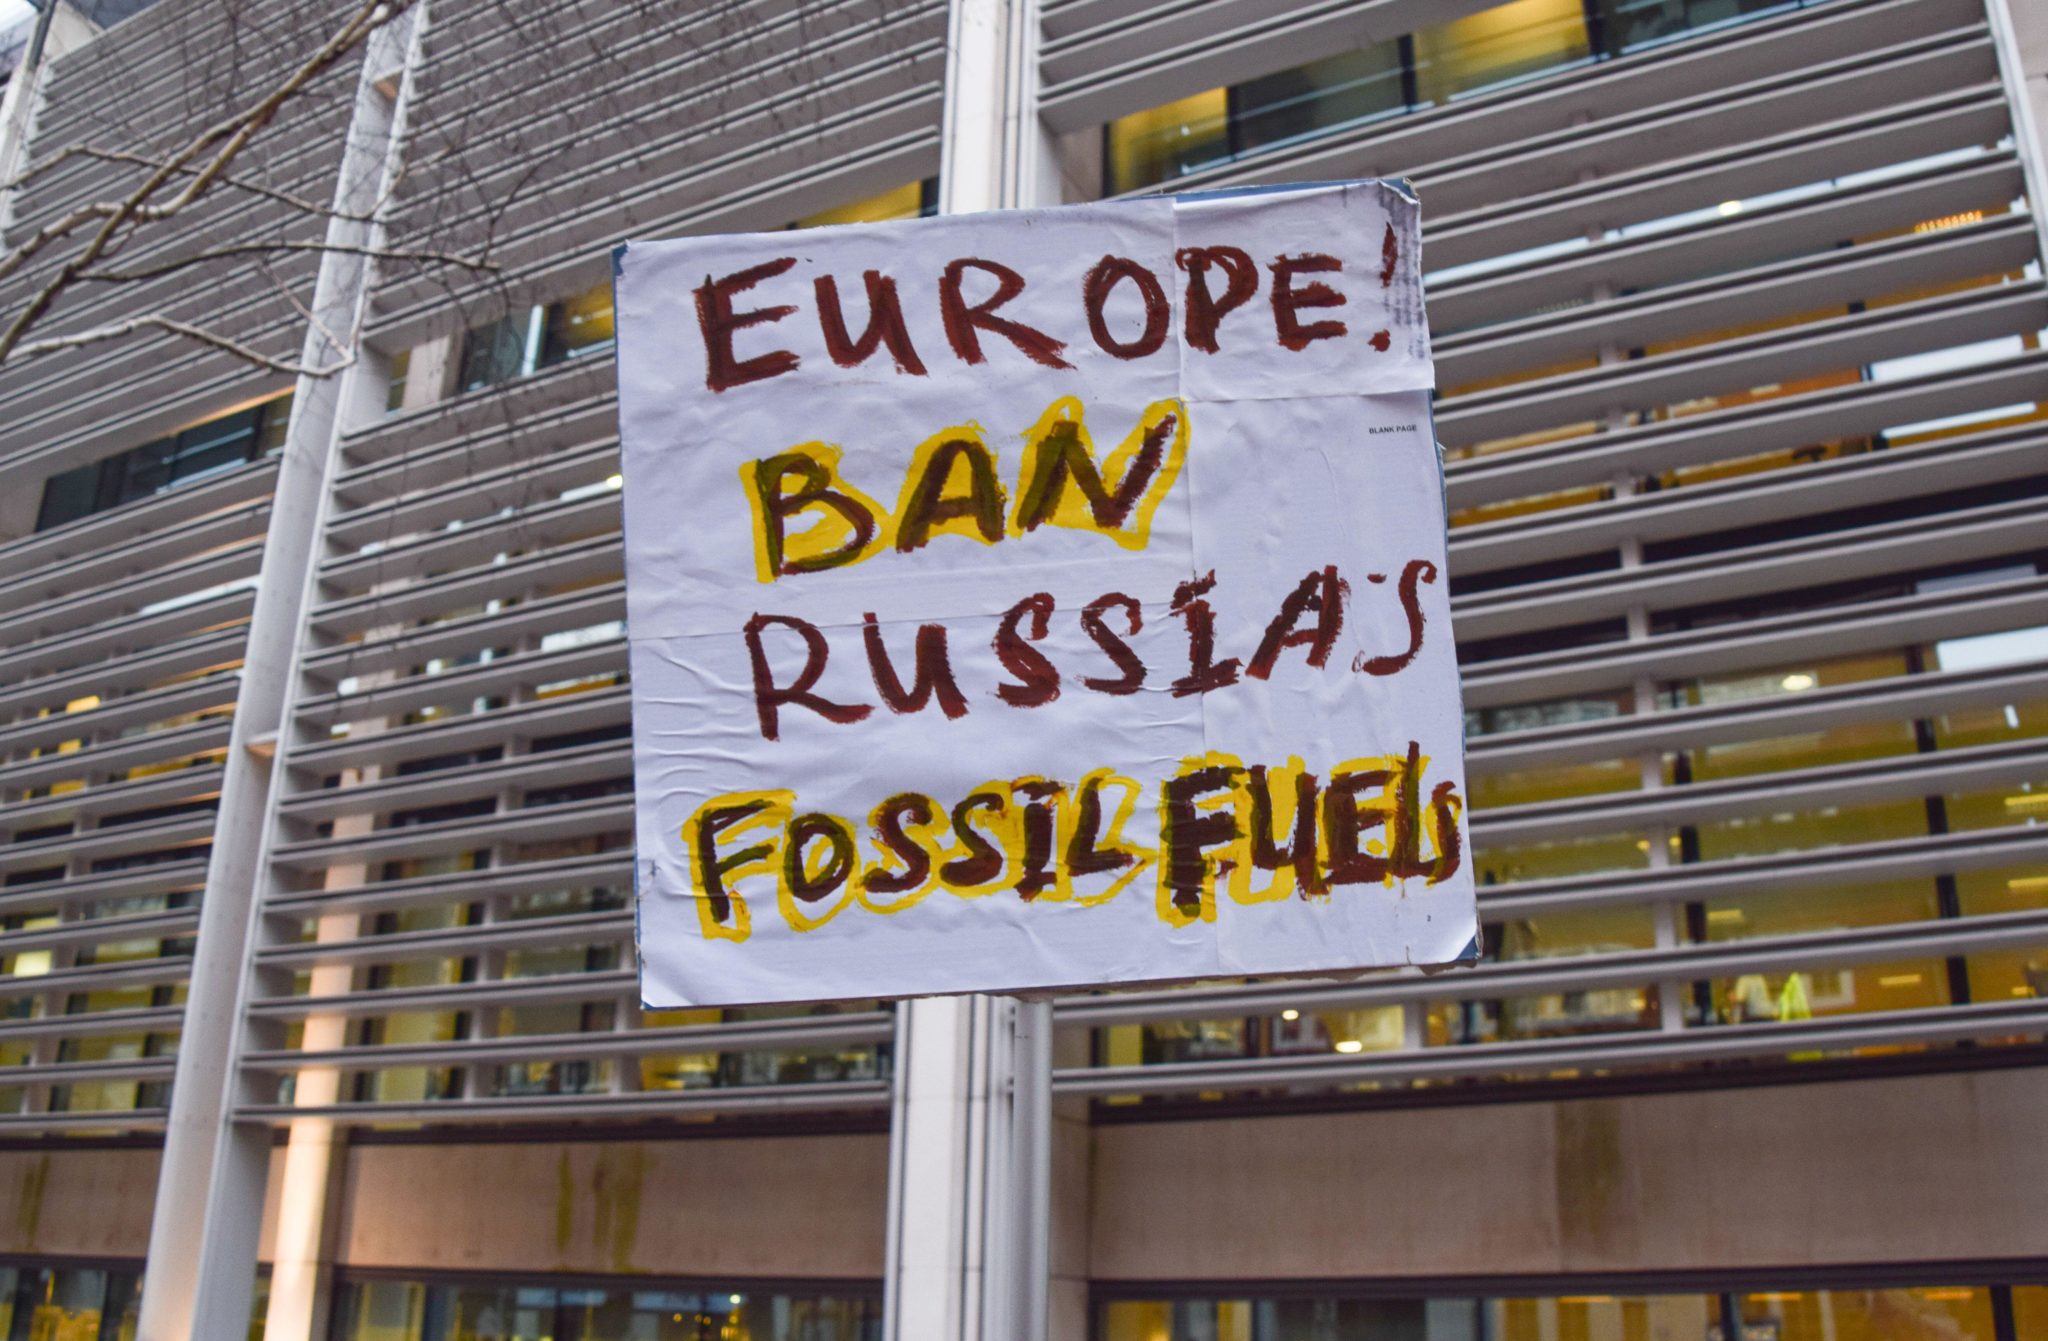 A protest sign calls for a ban on Russia's fossil fuels in London, England in March 2022